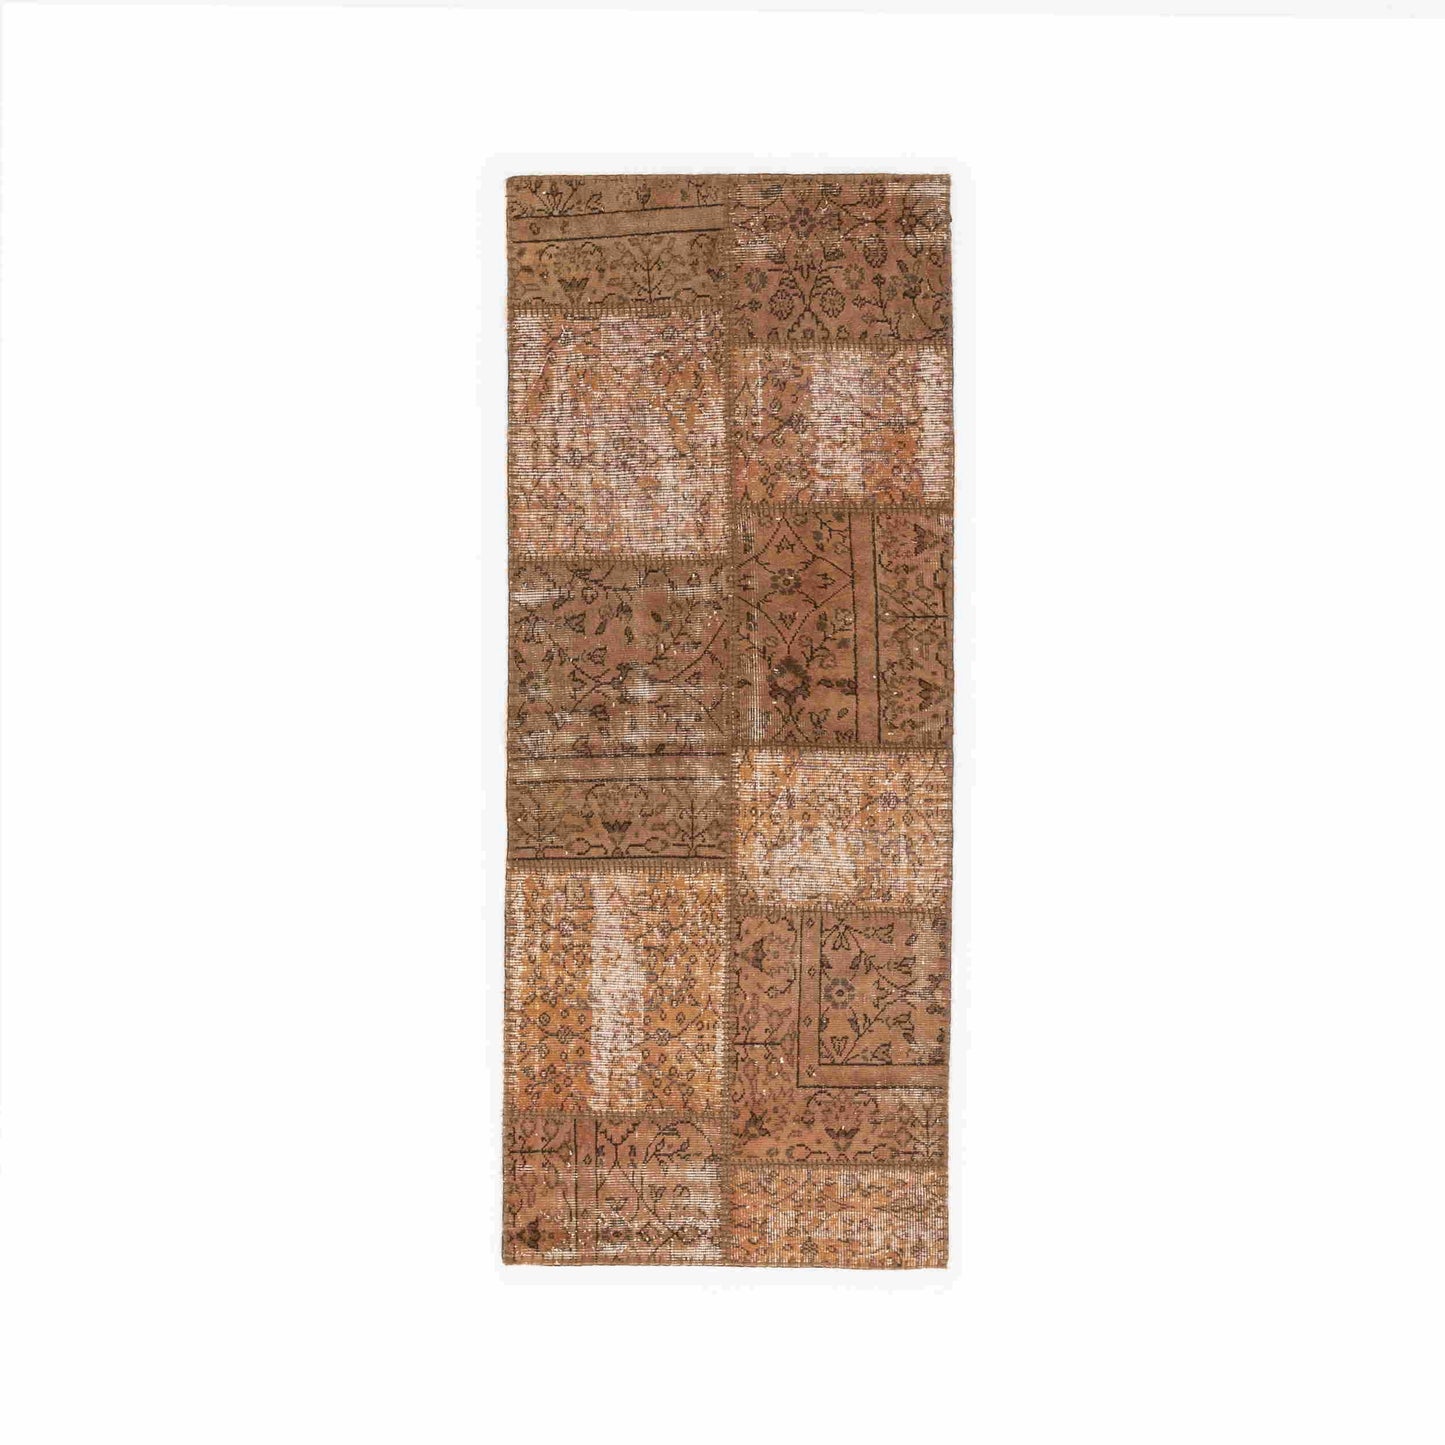 Oriental Rug Patchwork Hand Knotted Wool On Wool 80 x 198 Cm – 2' 8'' x 6' 6'' ER01